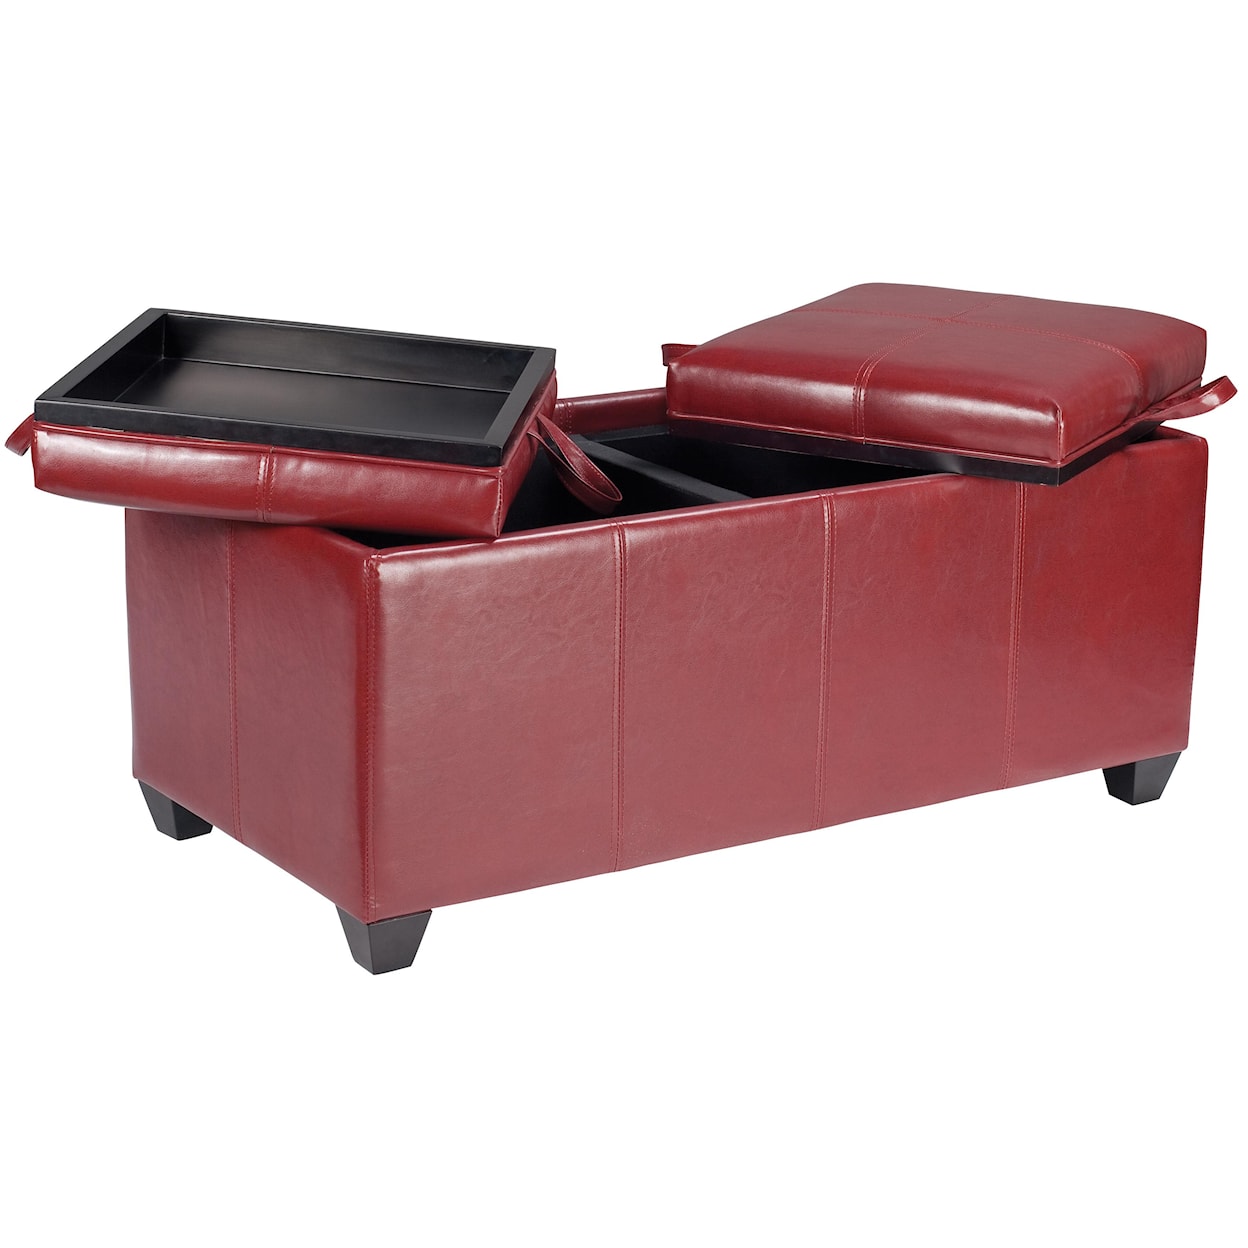 Office Star Benches Metro Double Storage Bench